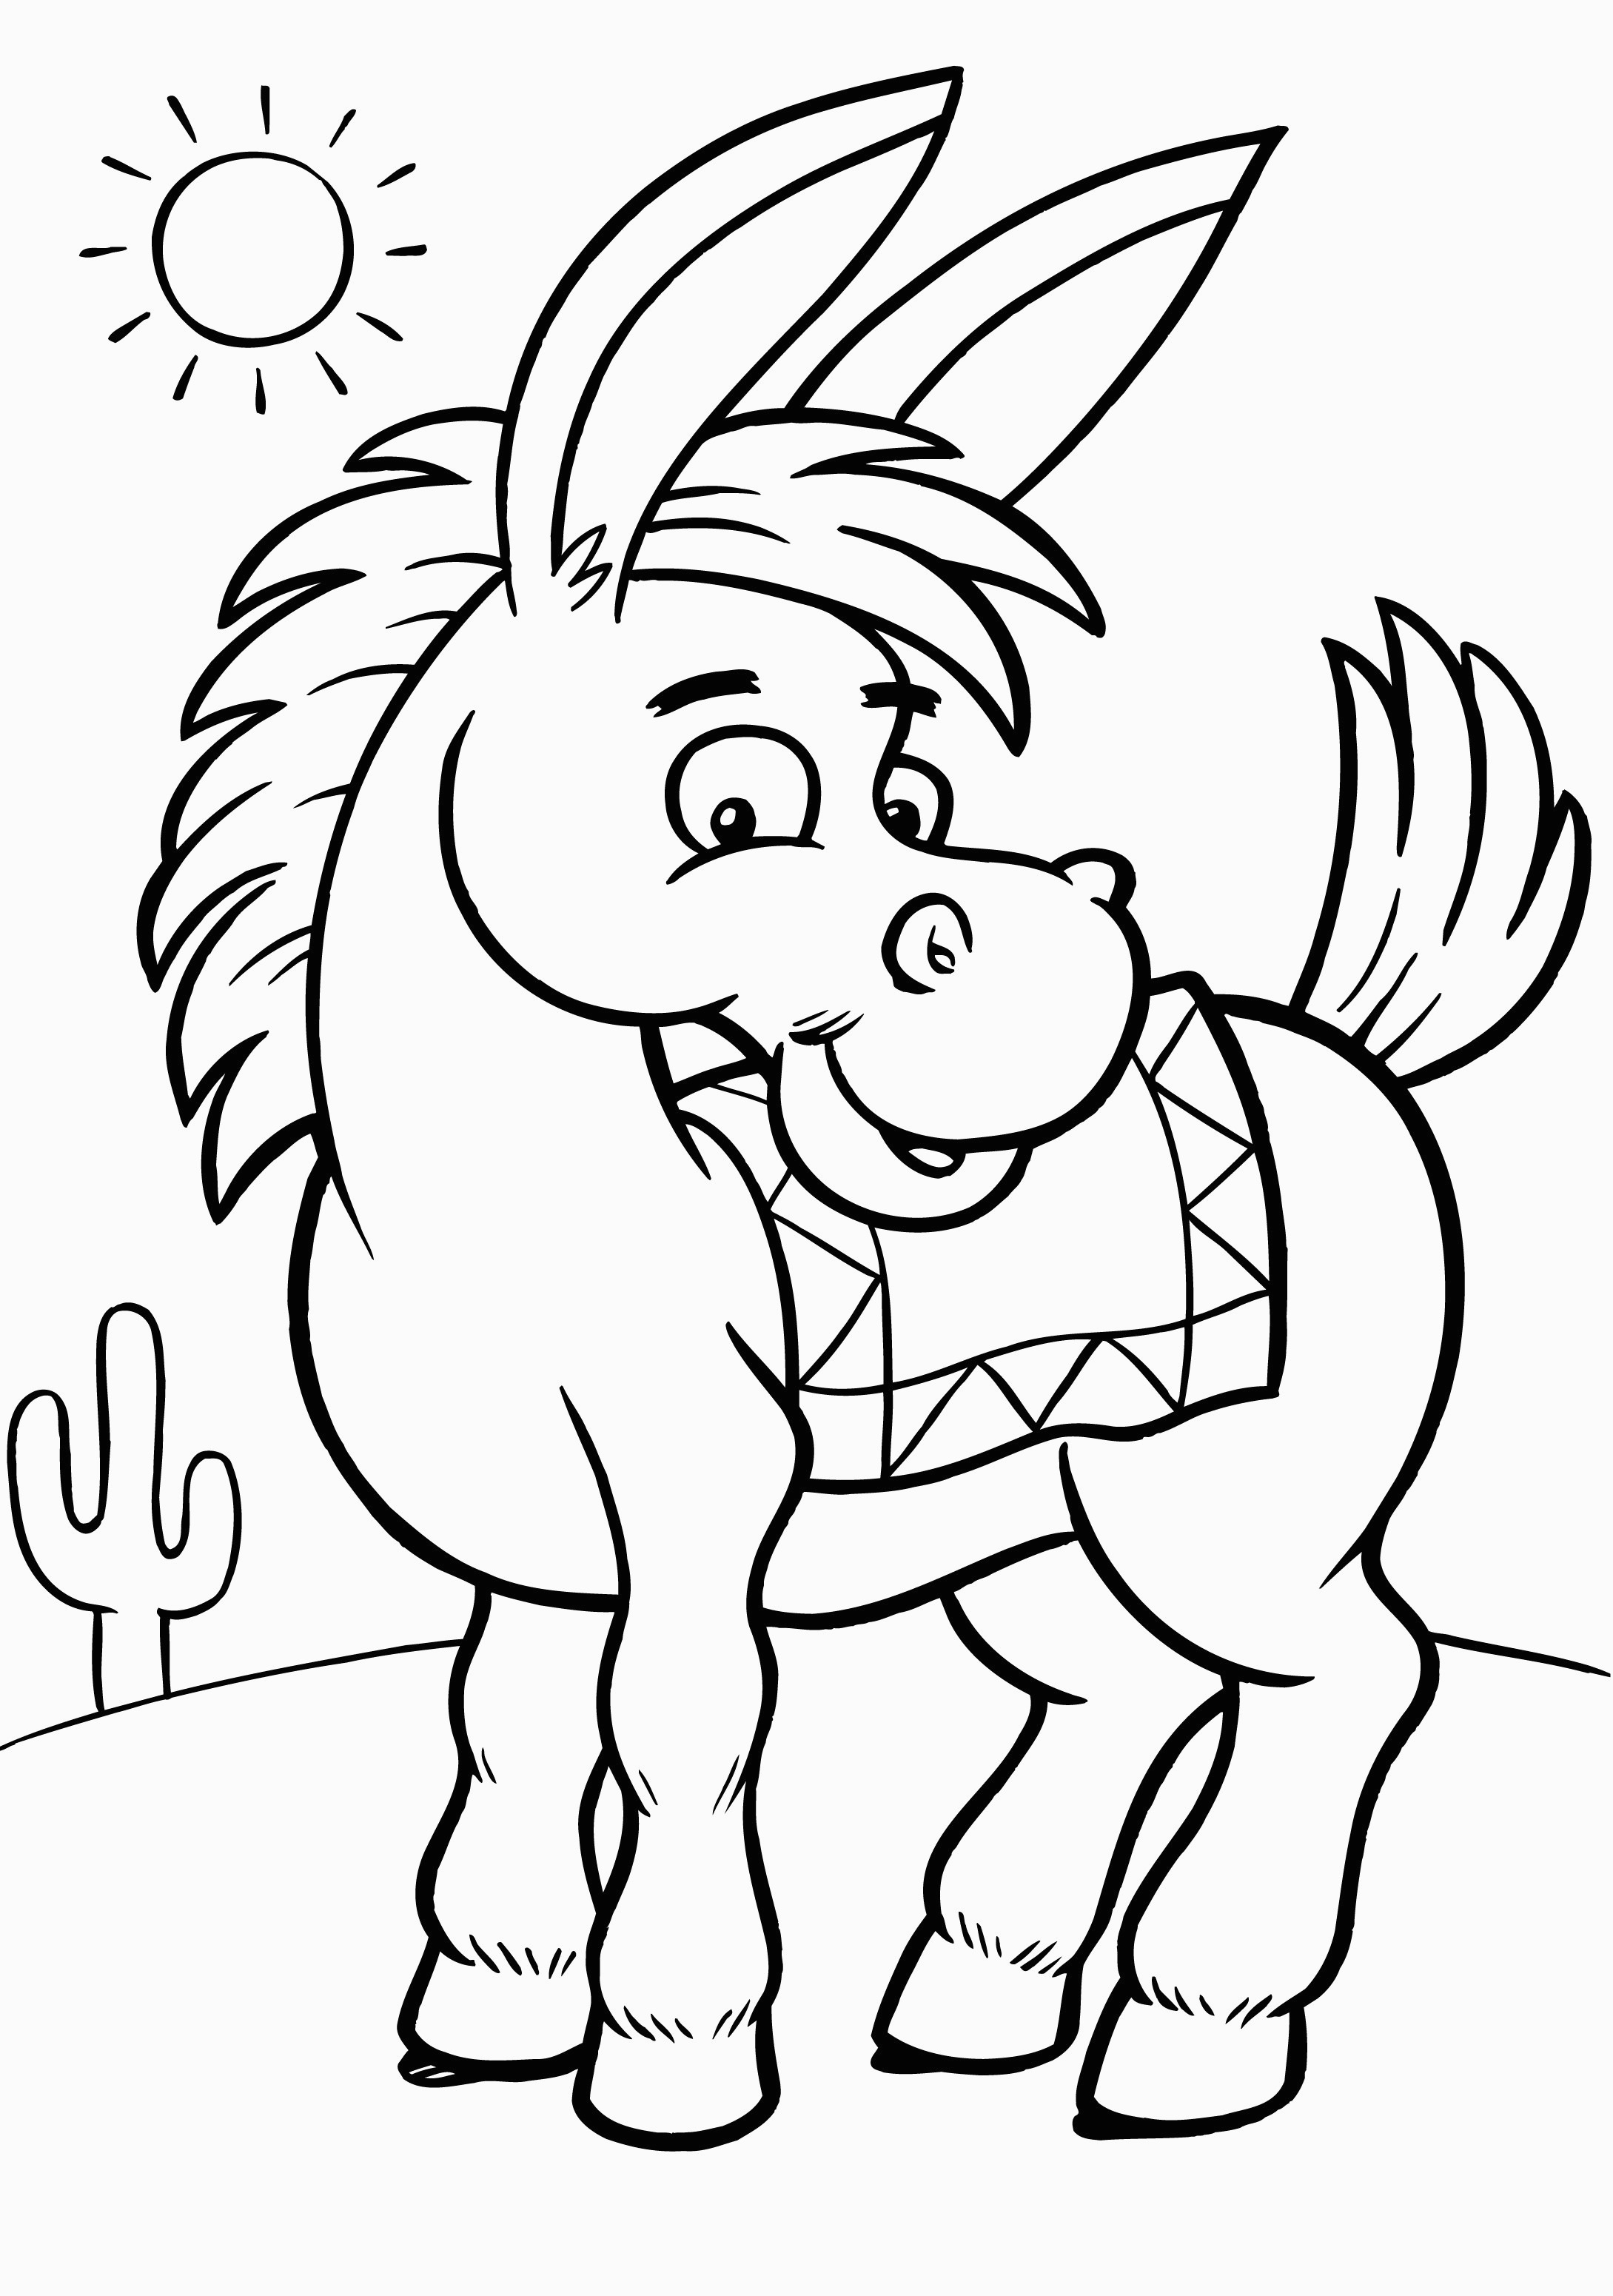 Coloring Pages For Elementary Students Coloring Pages Free Printable Ba Coloring For Kids Kindergarten